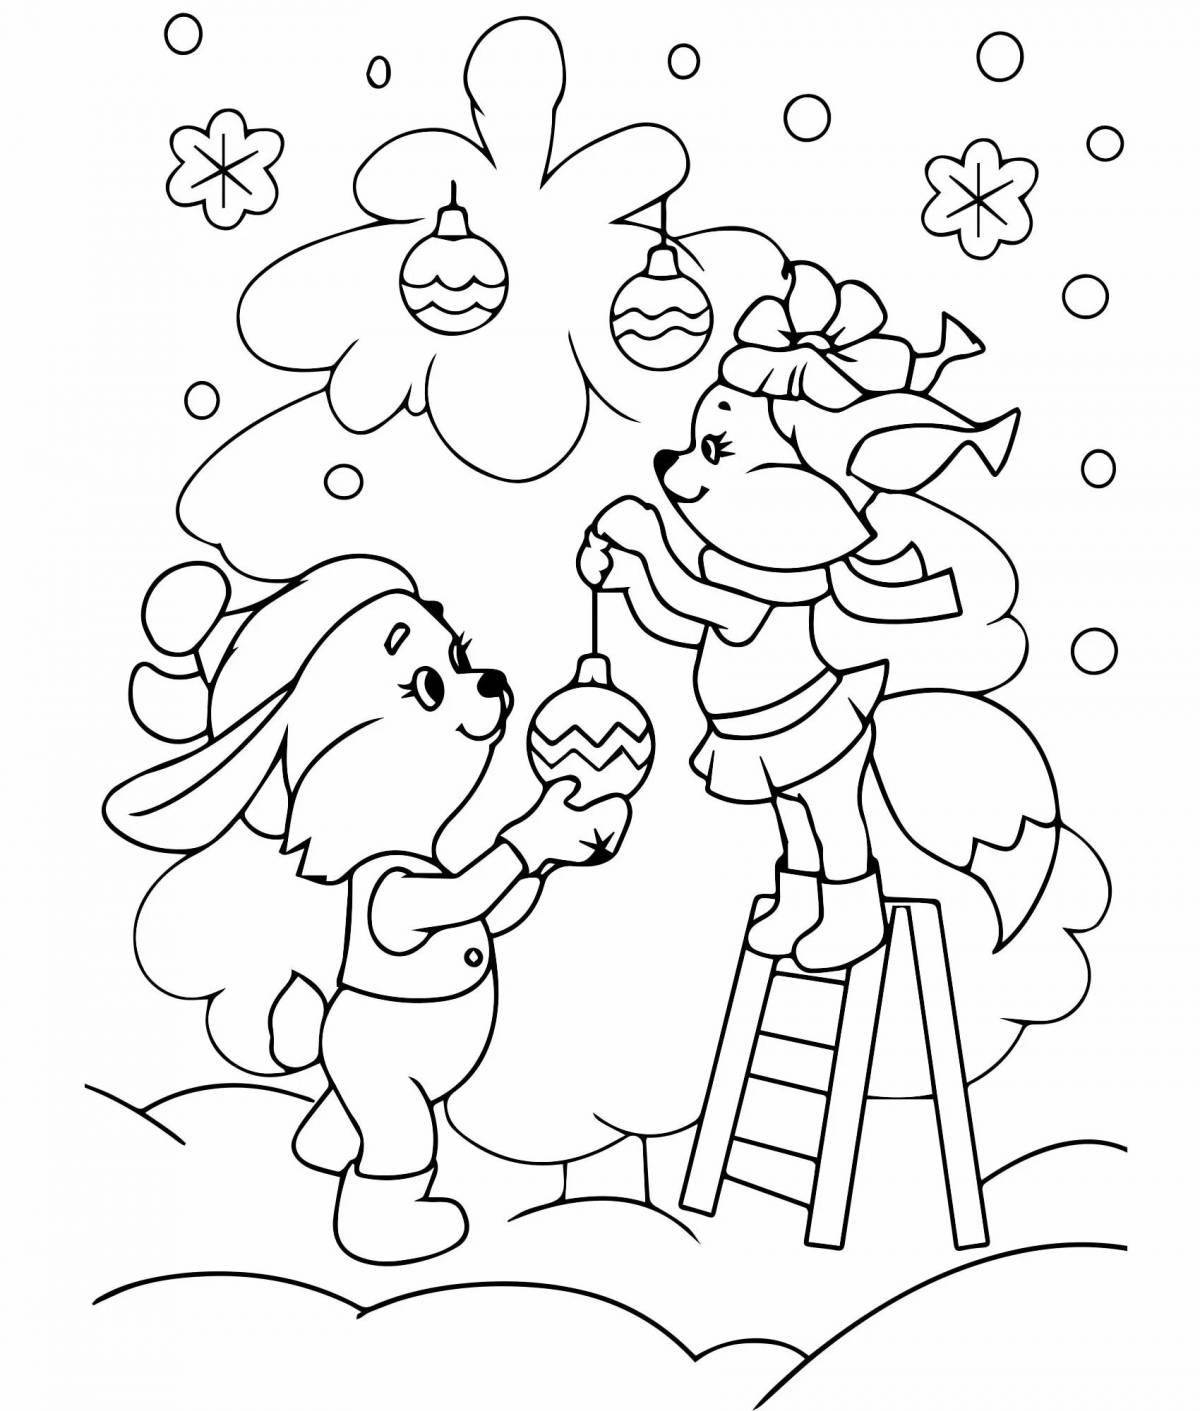 Bright winter coloring book for children 6-7 years old